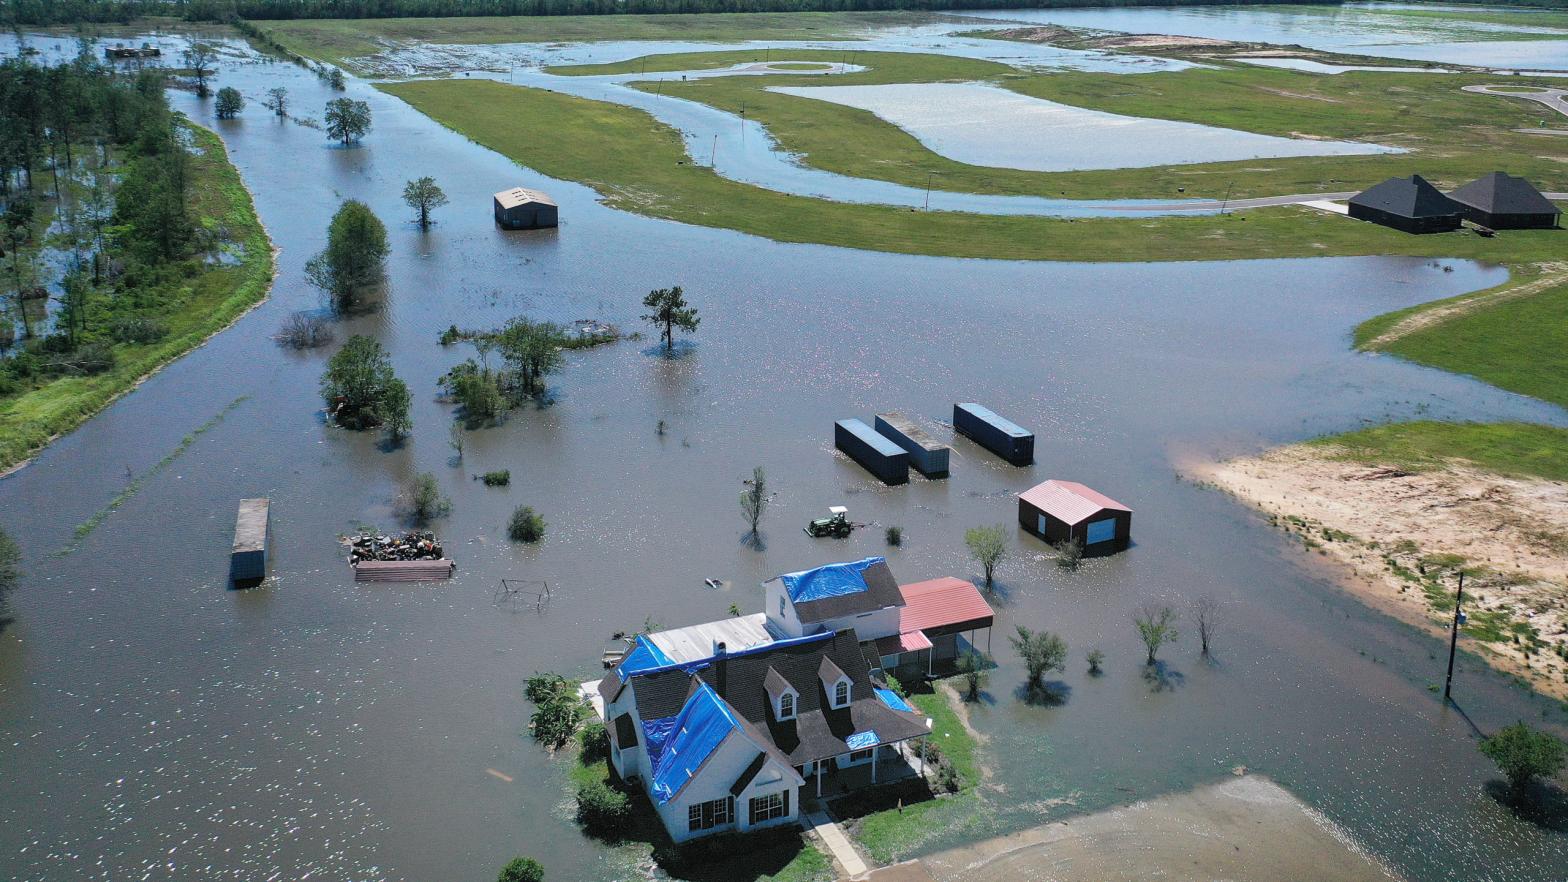 In this aerial view from a drone, a model home is surrounded by floodwaters from Hurricane Delta on October 10, 2020, in Iowa, Louisiana. Hurricane Delta made landfall as a Category 2 storm in Louisiana initially leaving hundreds of thousands of customers without power.  (Photo: Mario Tama, Getty Images)